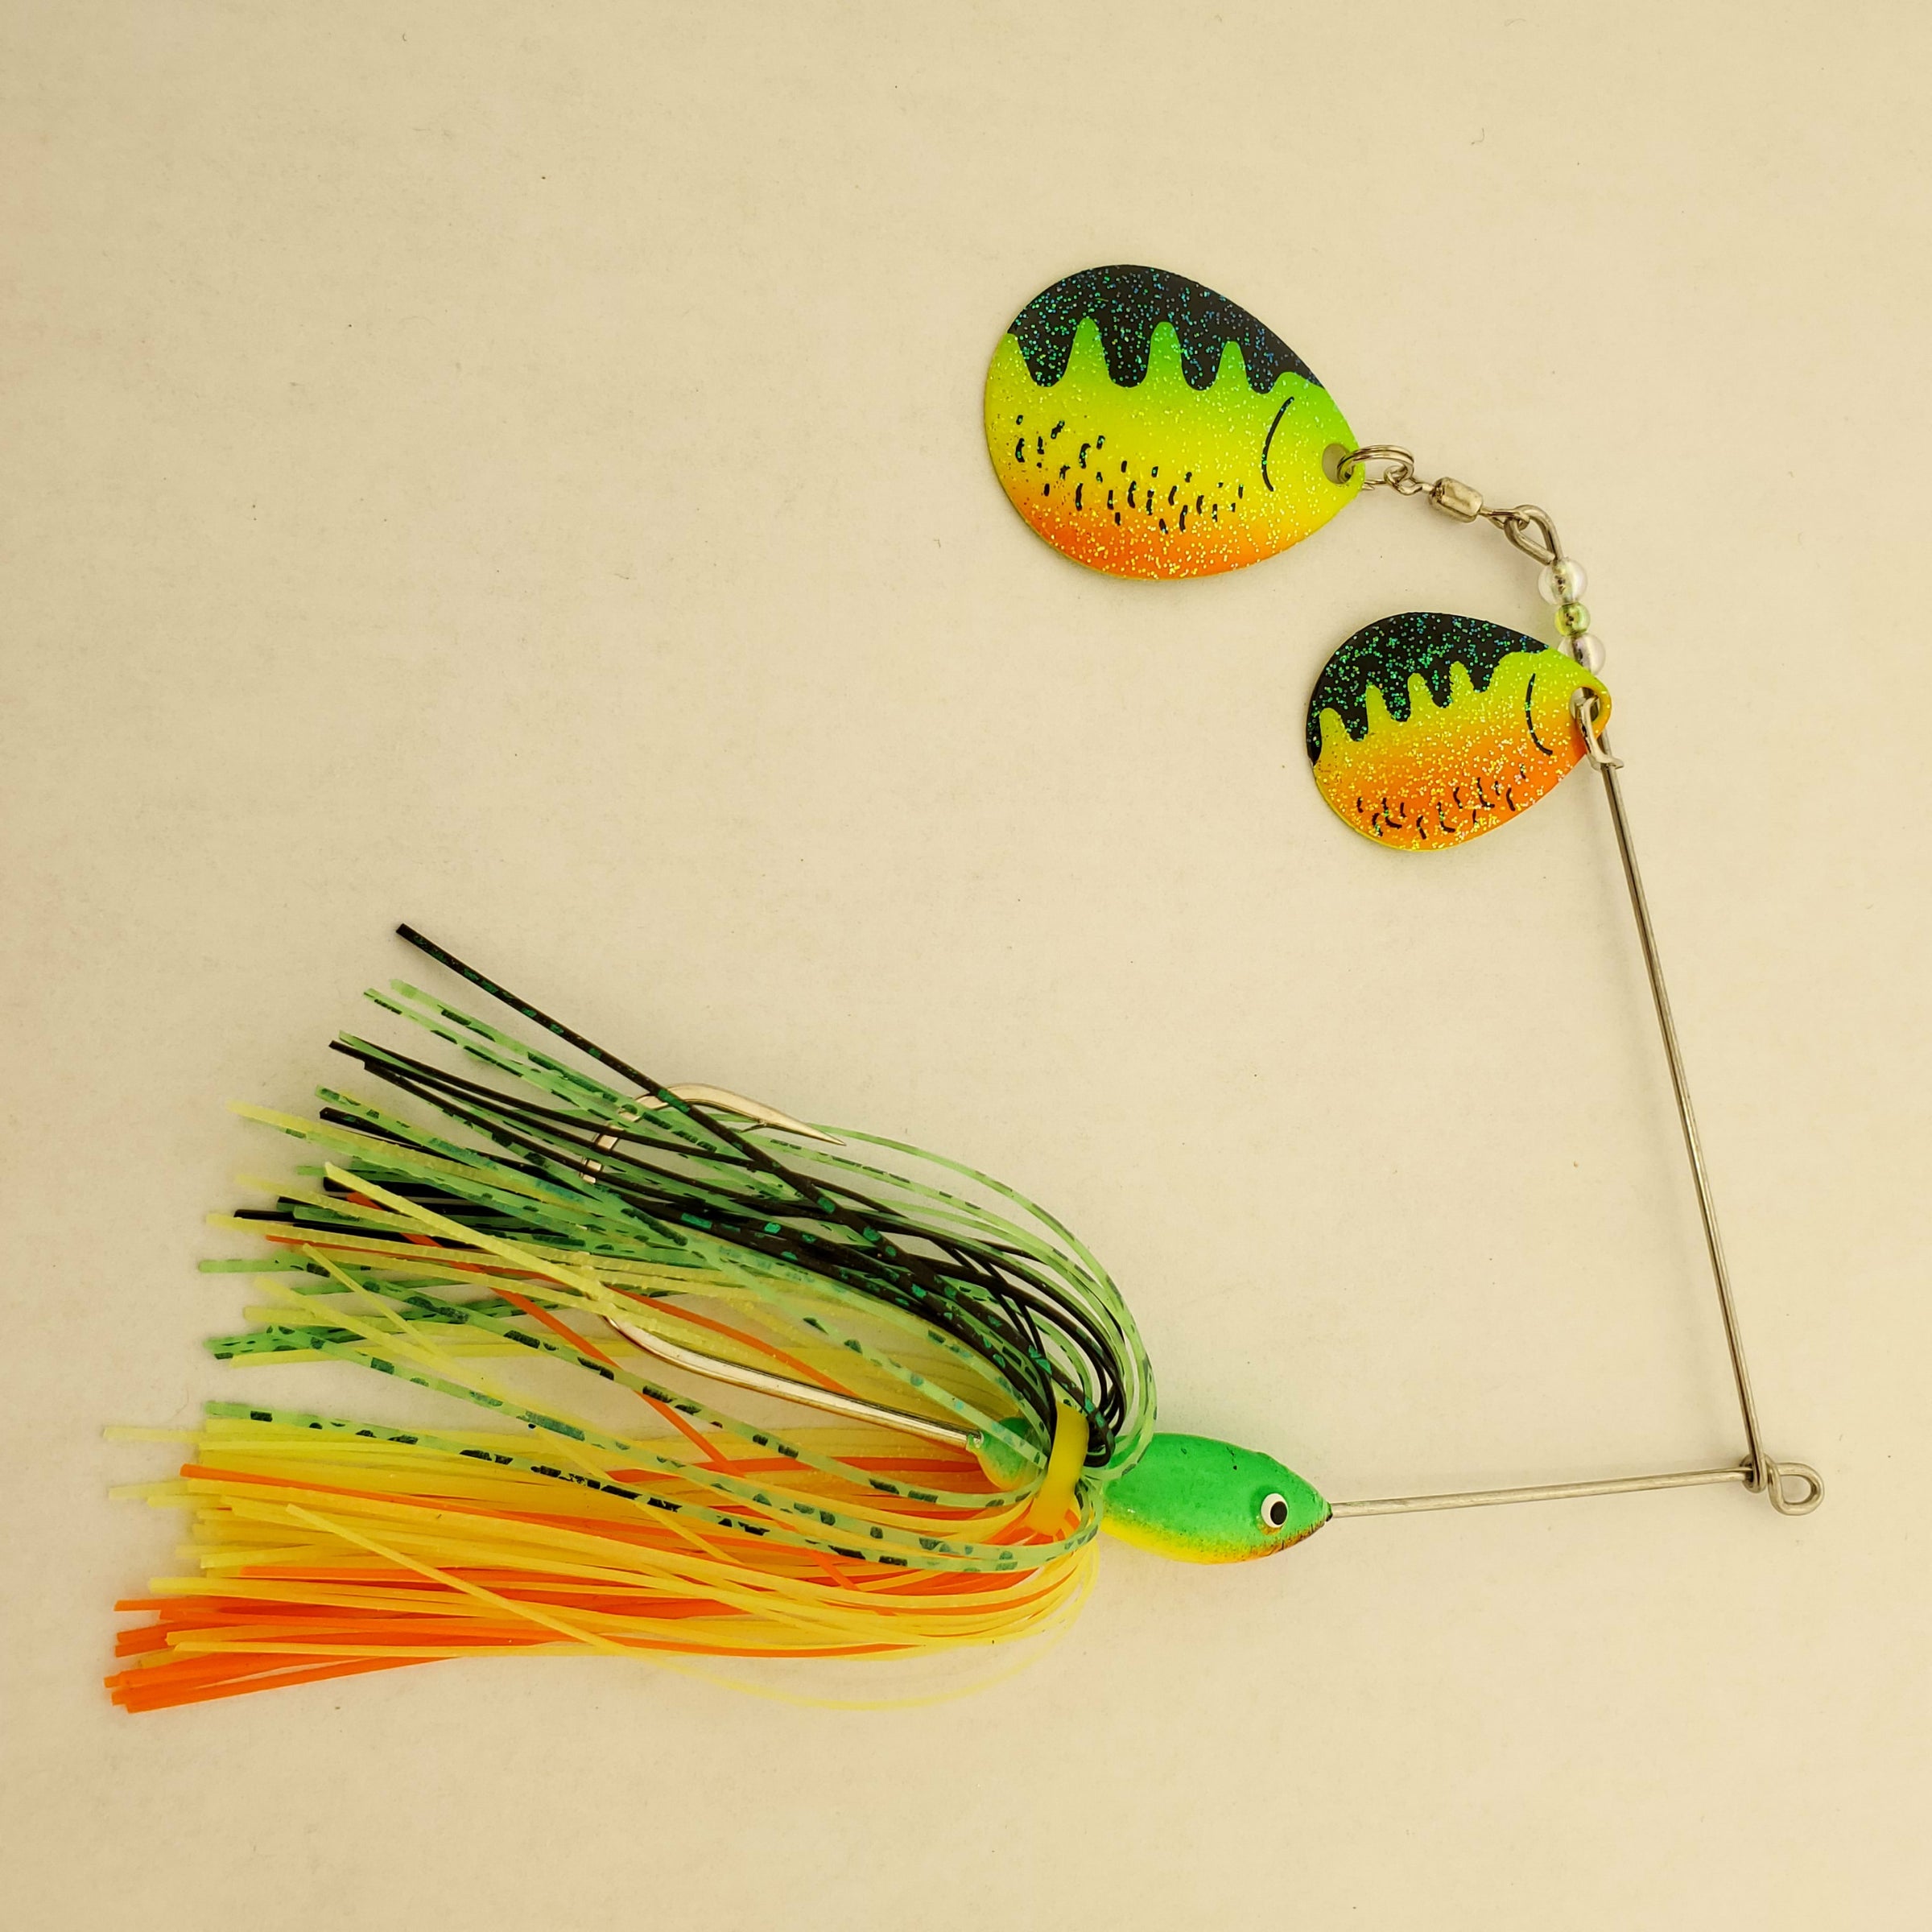 Spinnerbait #32 Perch Painted Colorado blades, Black, Perch, Chartreuse  Yellow Skirt